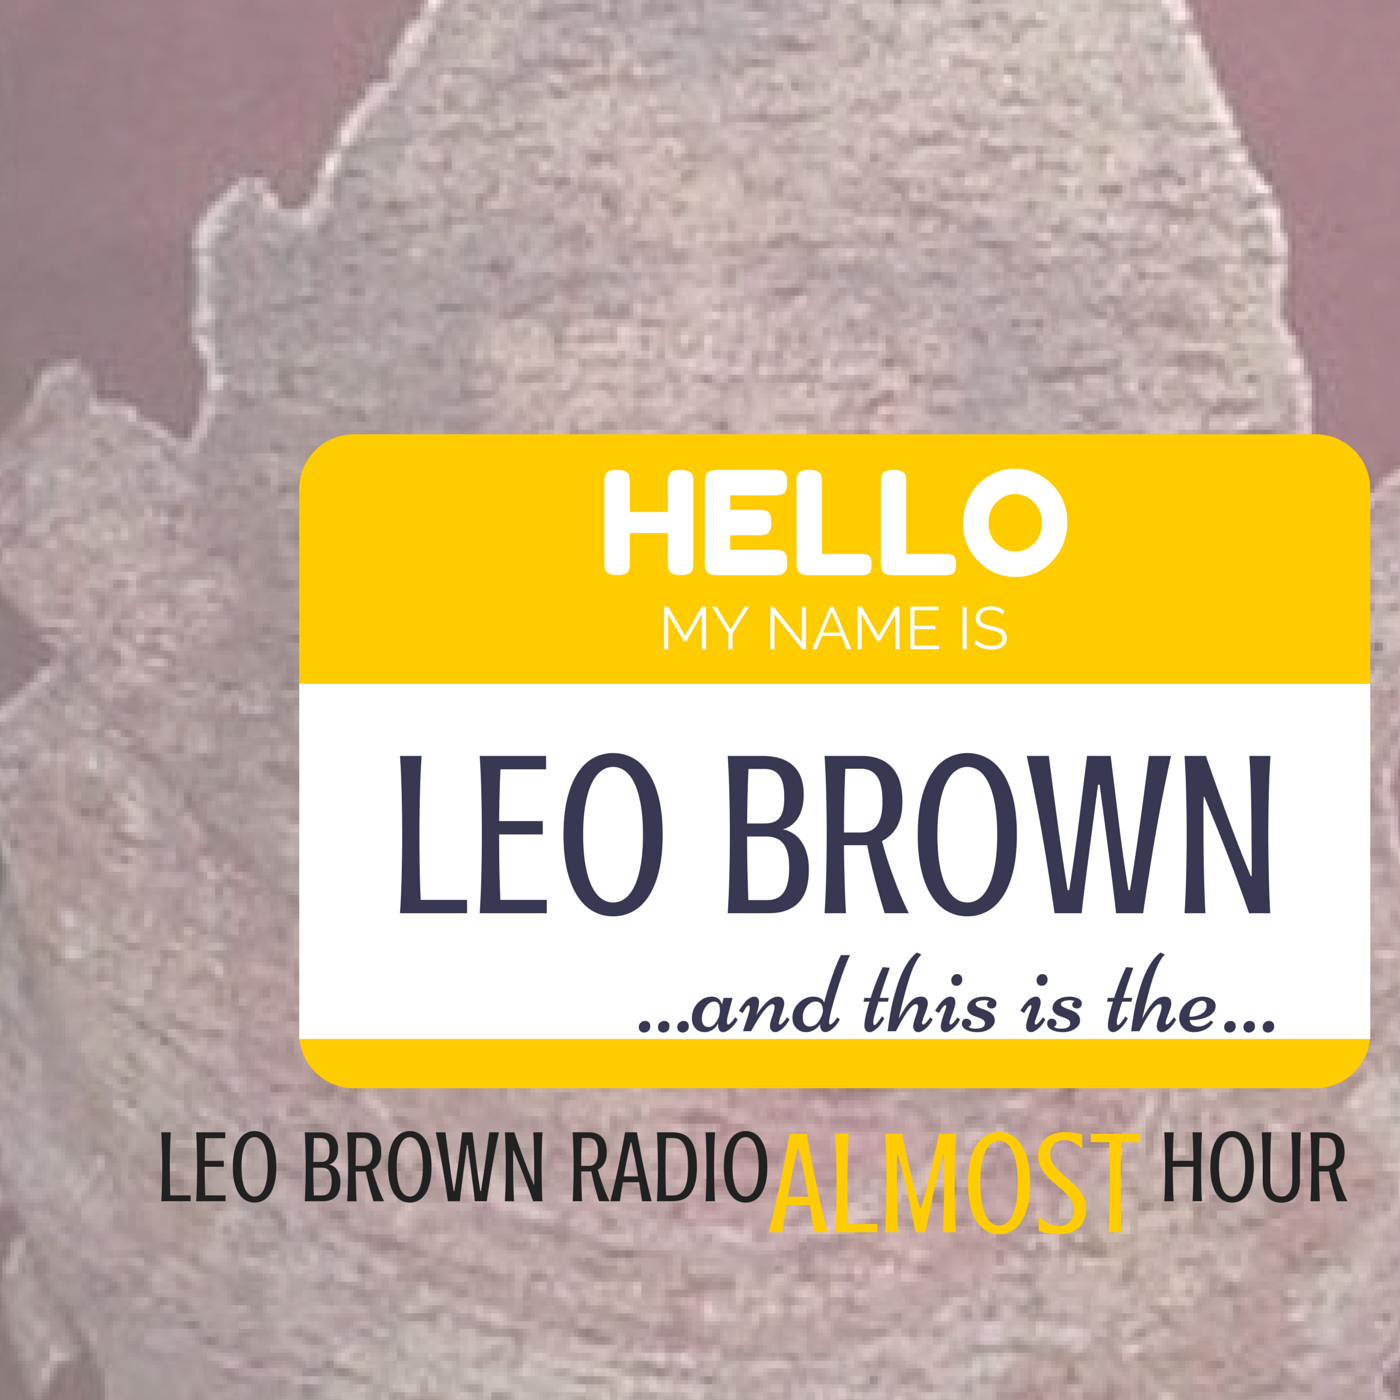 Leo Brown Almost Hour 02/17/17